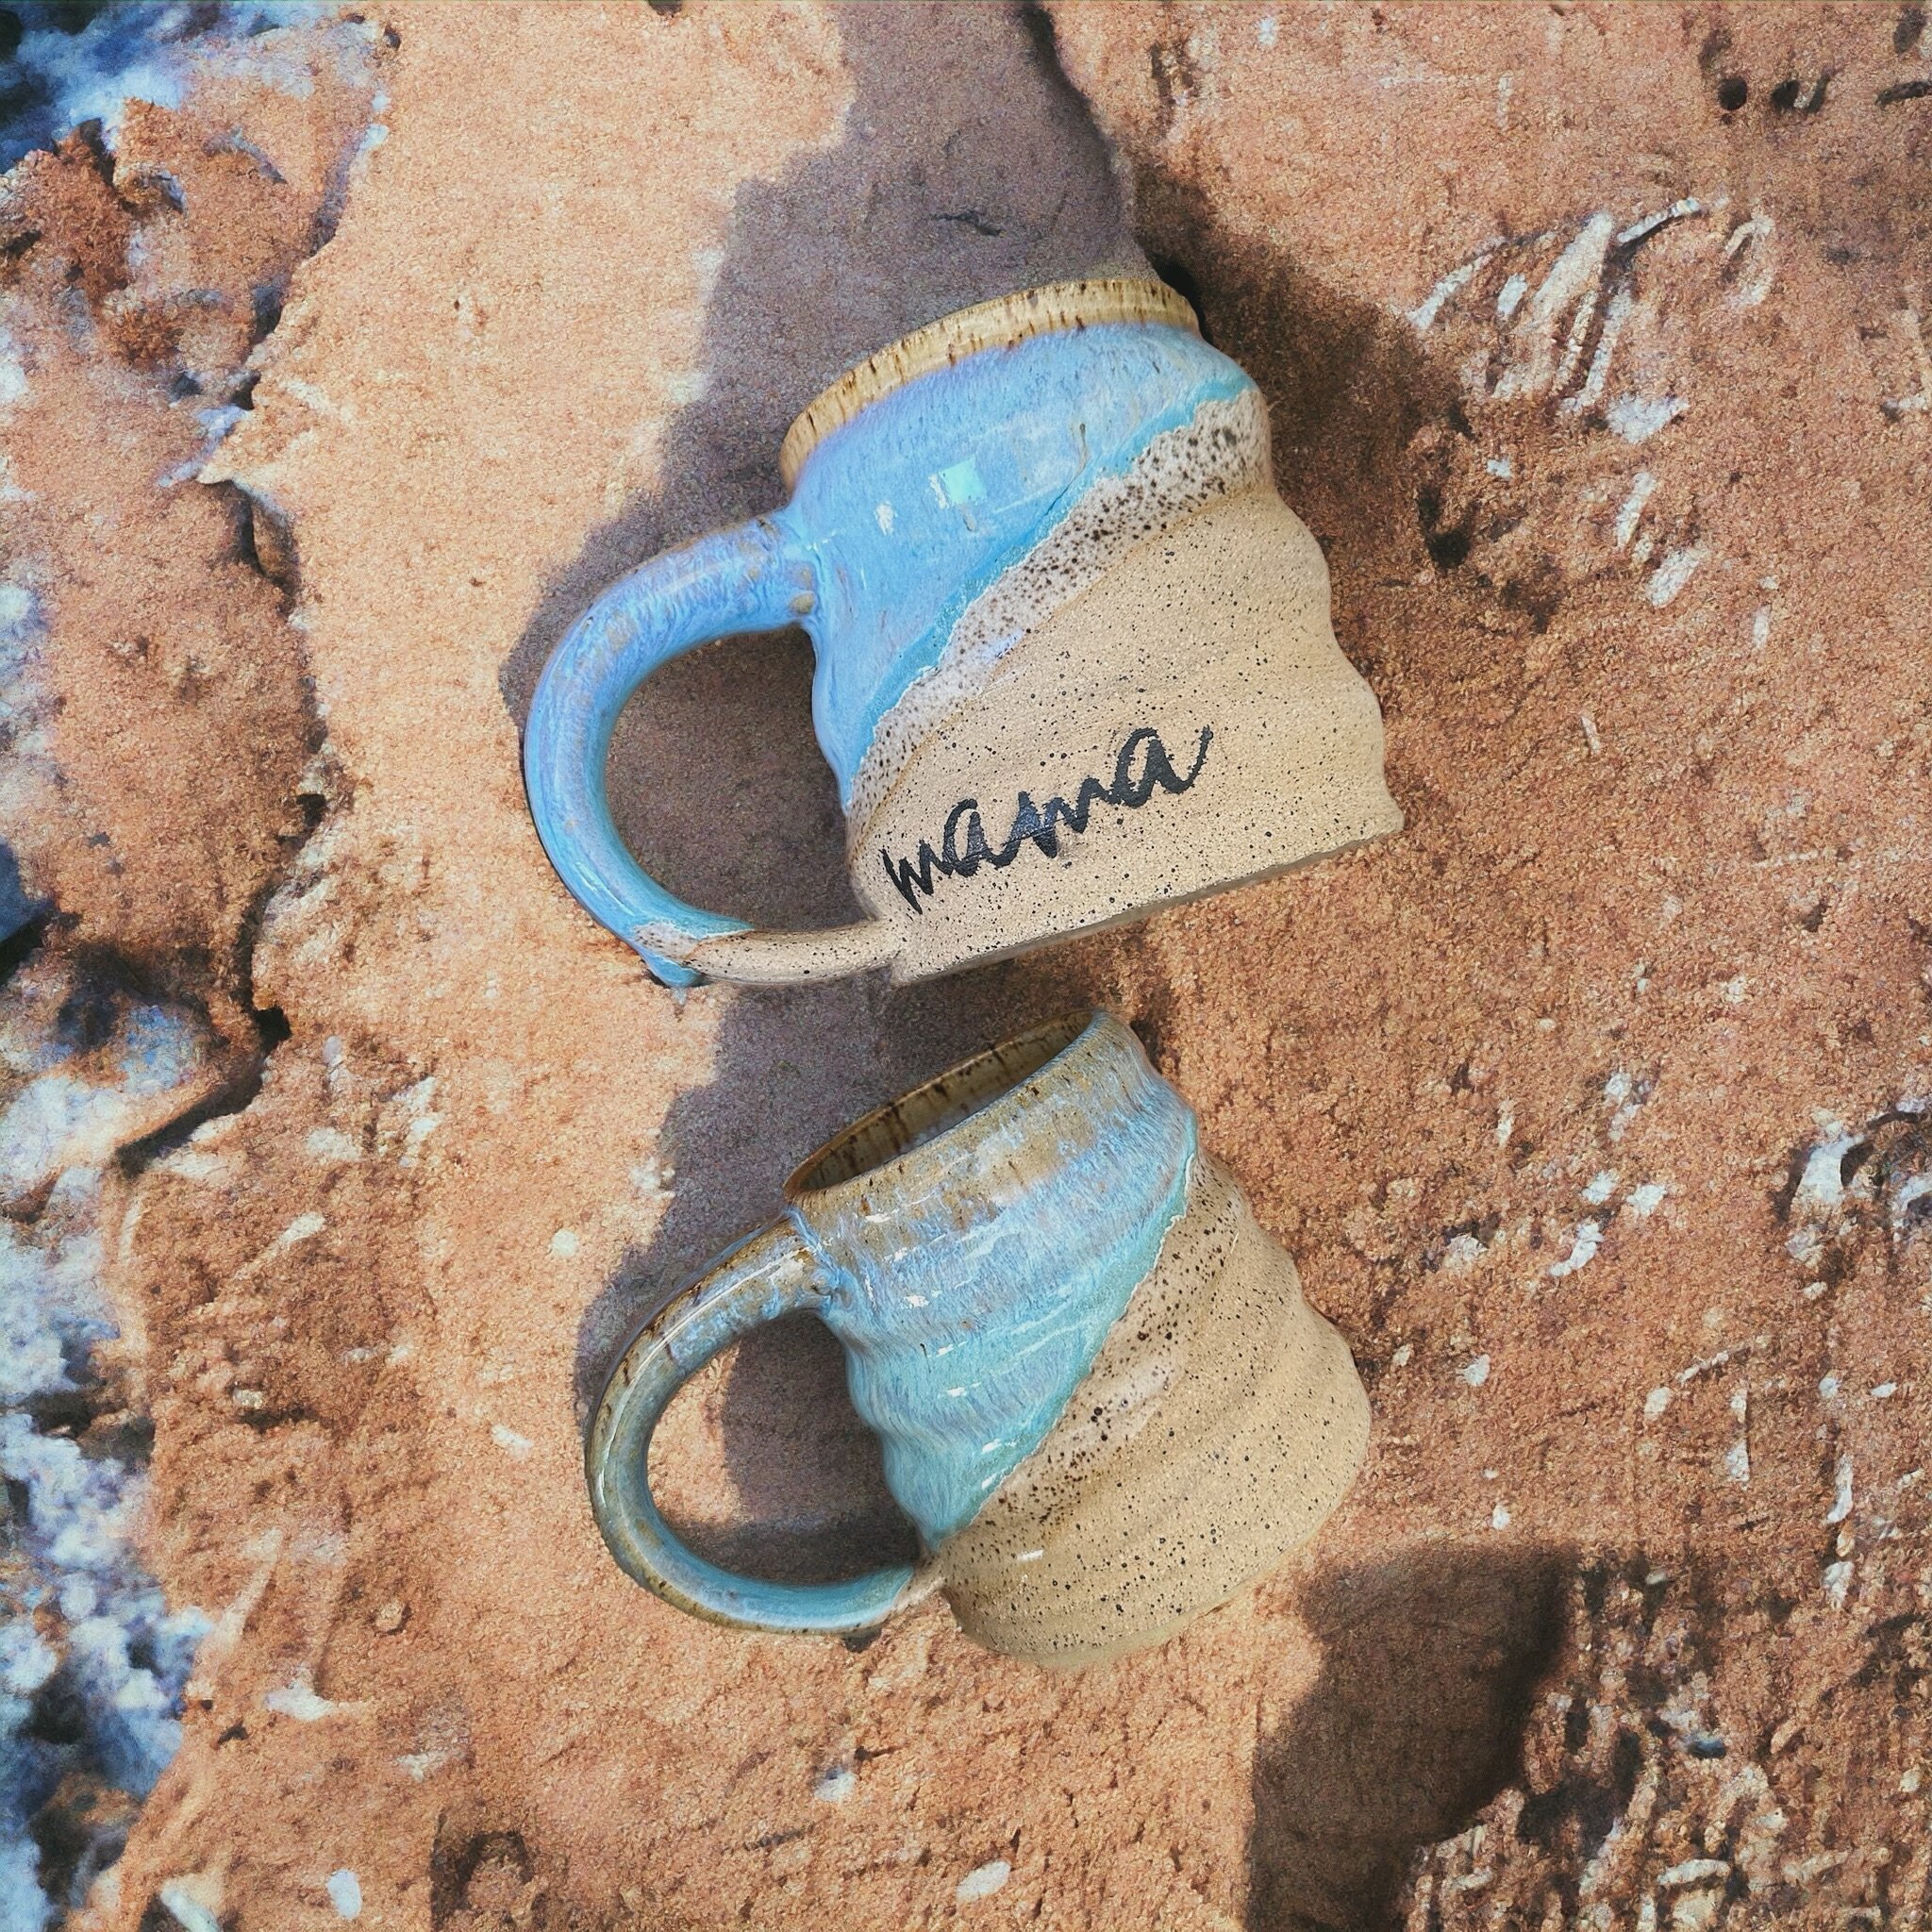 ✨ Celebrating all Mamas this weekend! ✨ 

〰️ This is the Mama and Mini mug set beach style! Perfect for Mama and her little one to have matching mugs 💕 🏝️